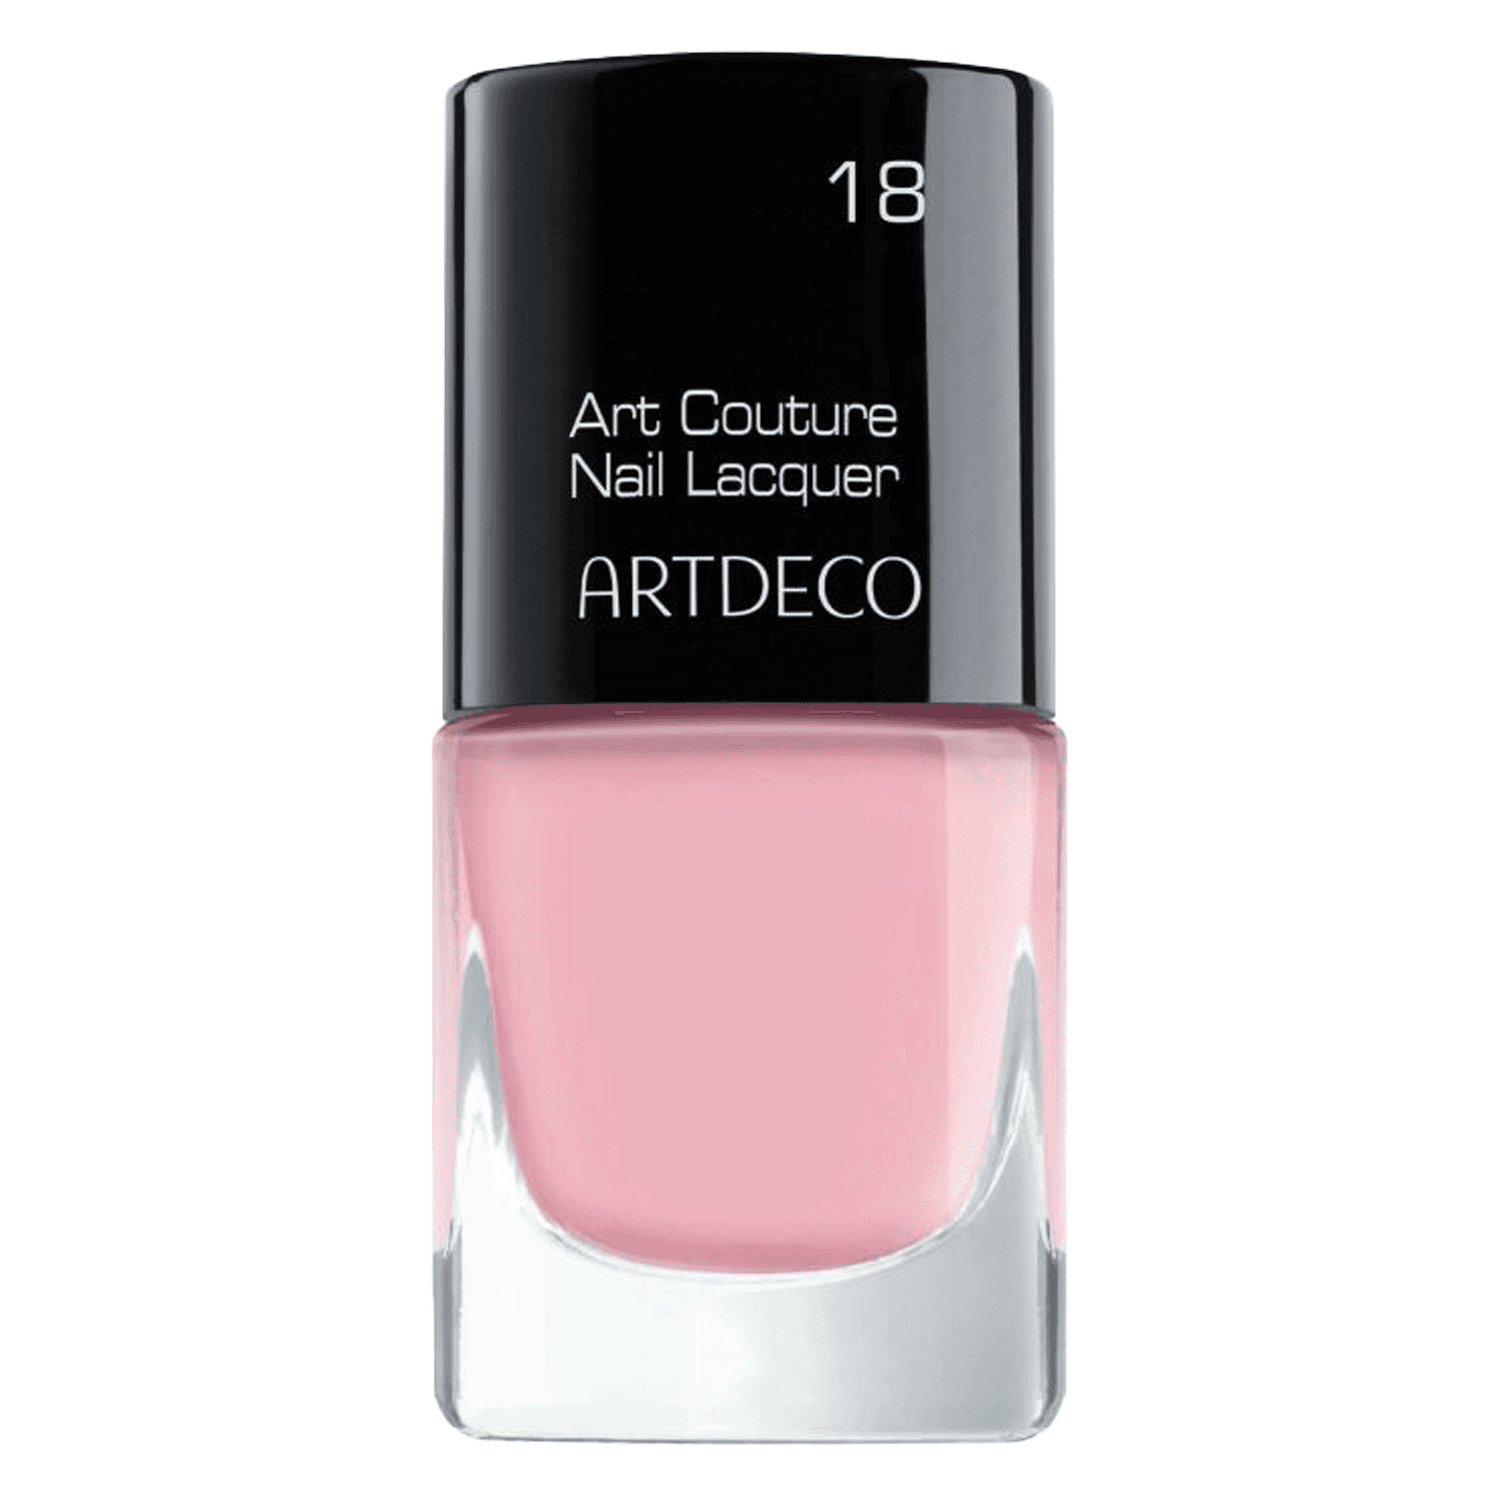 Art Couture - Nail Lacquer Rosy Dahlia 18